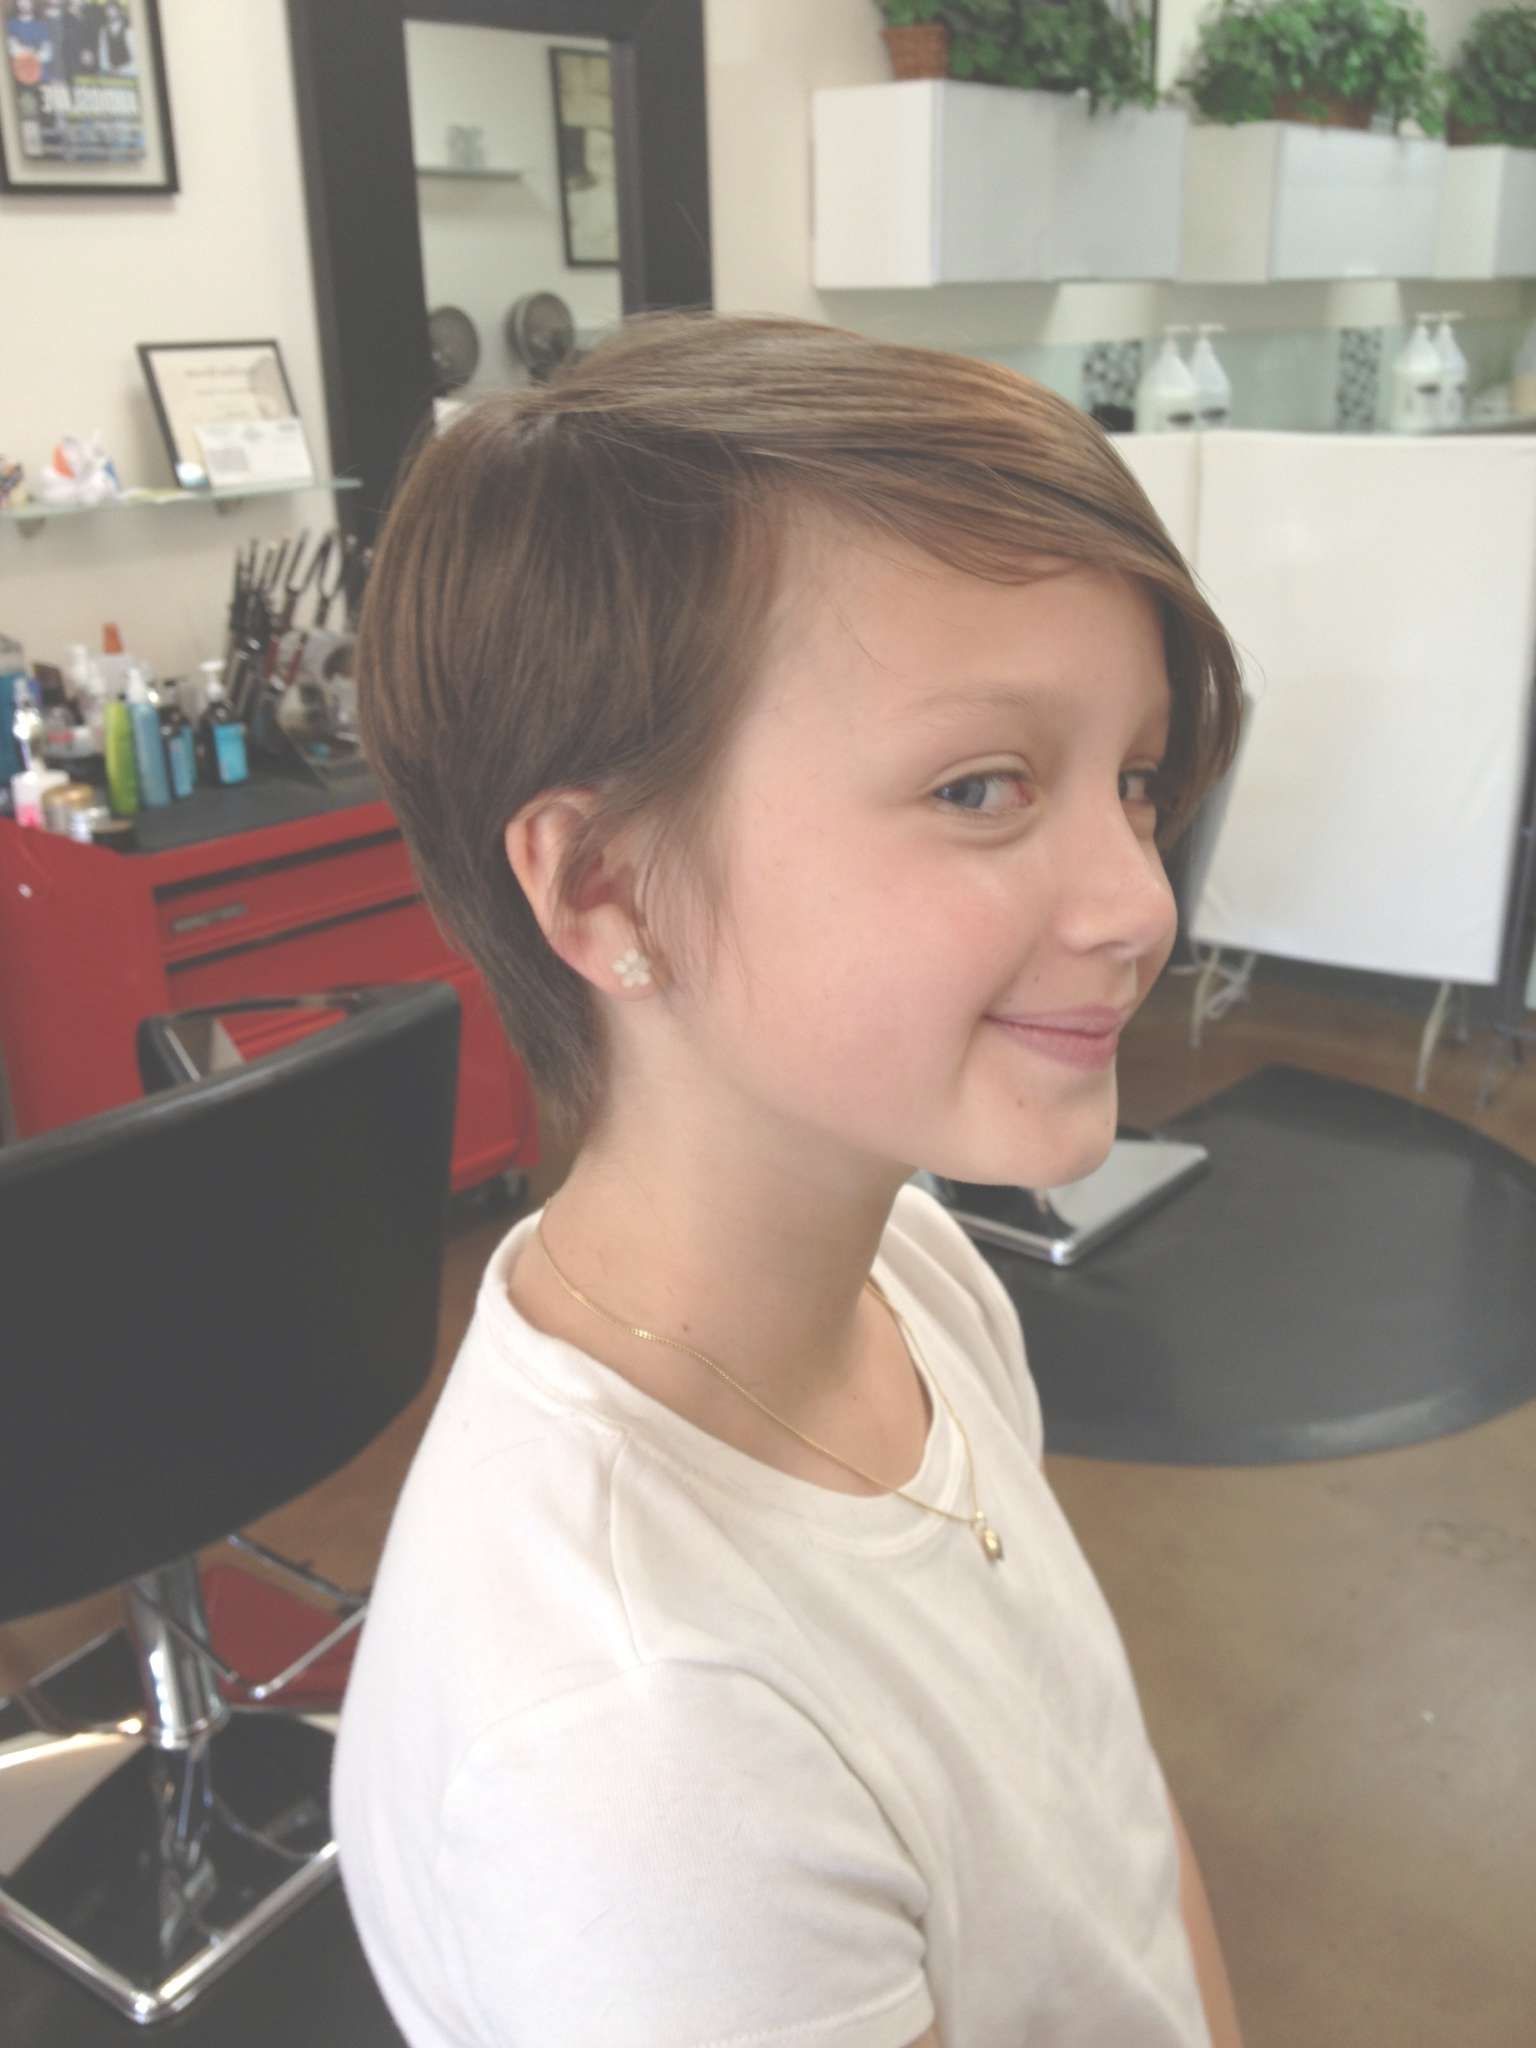 Cool Pixie Cut For A Tween. | Hairstyles Short/pixie | Pinterest Throughout Most Popular Childrens Pixie Hairstyles (Photo 7 of 16)